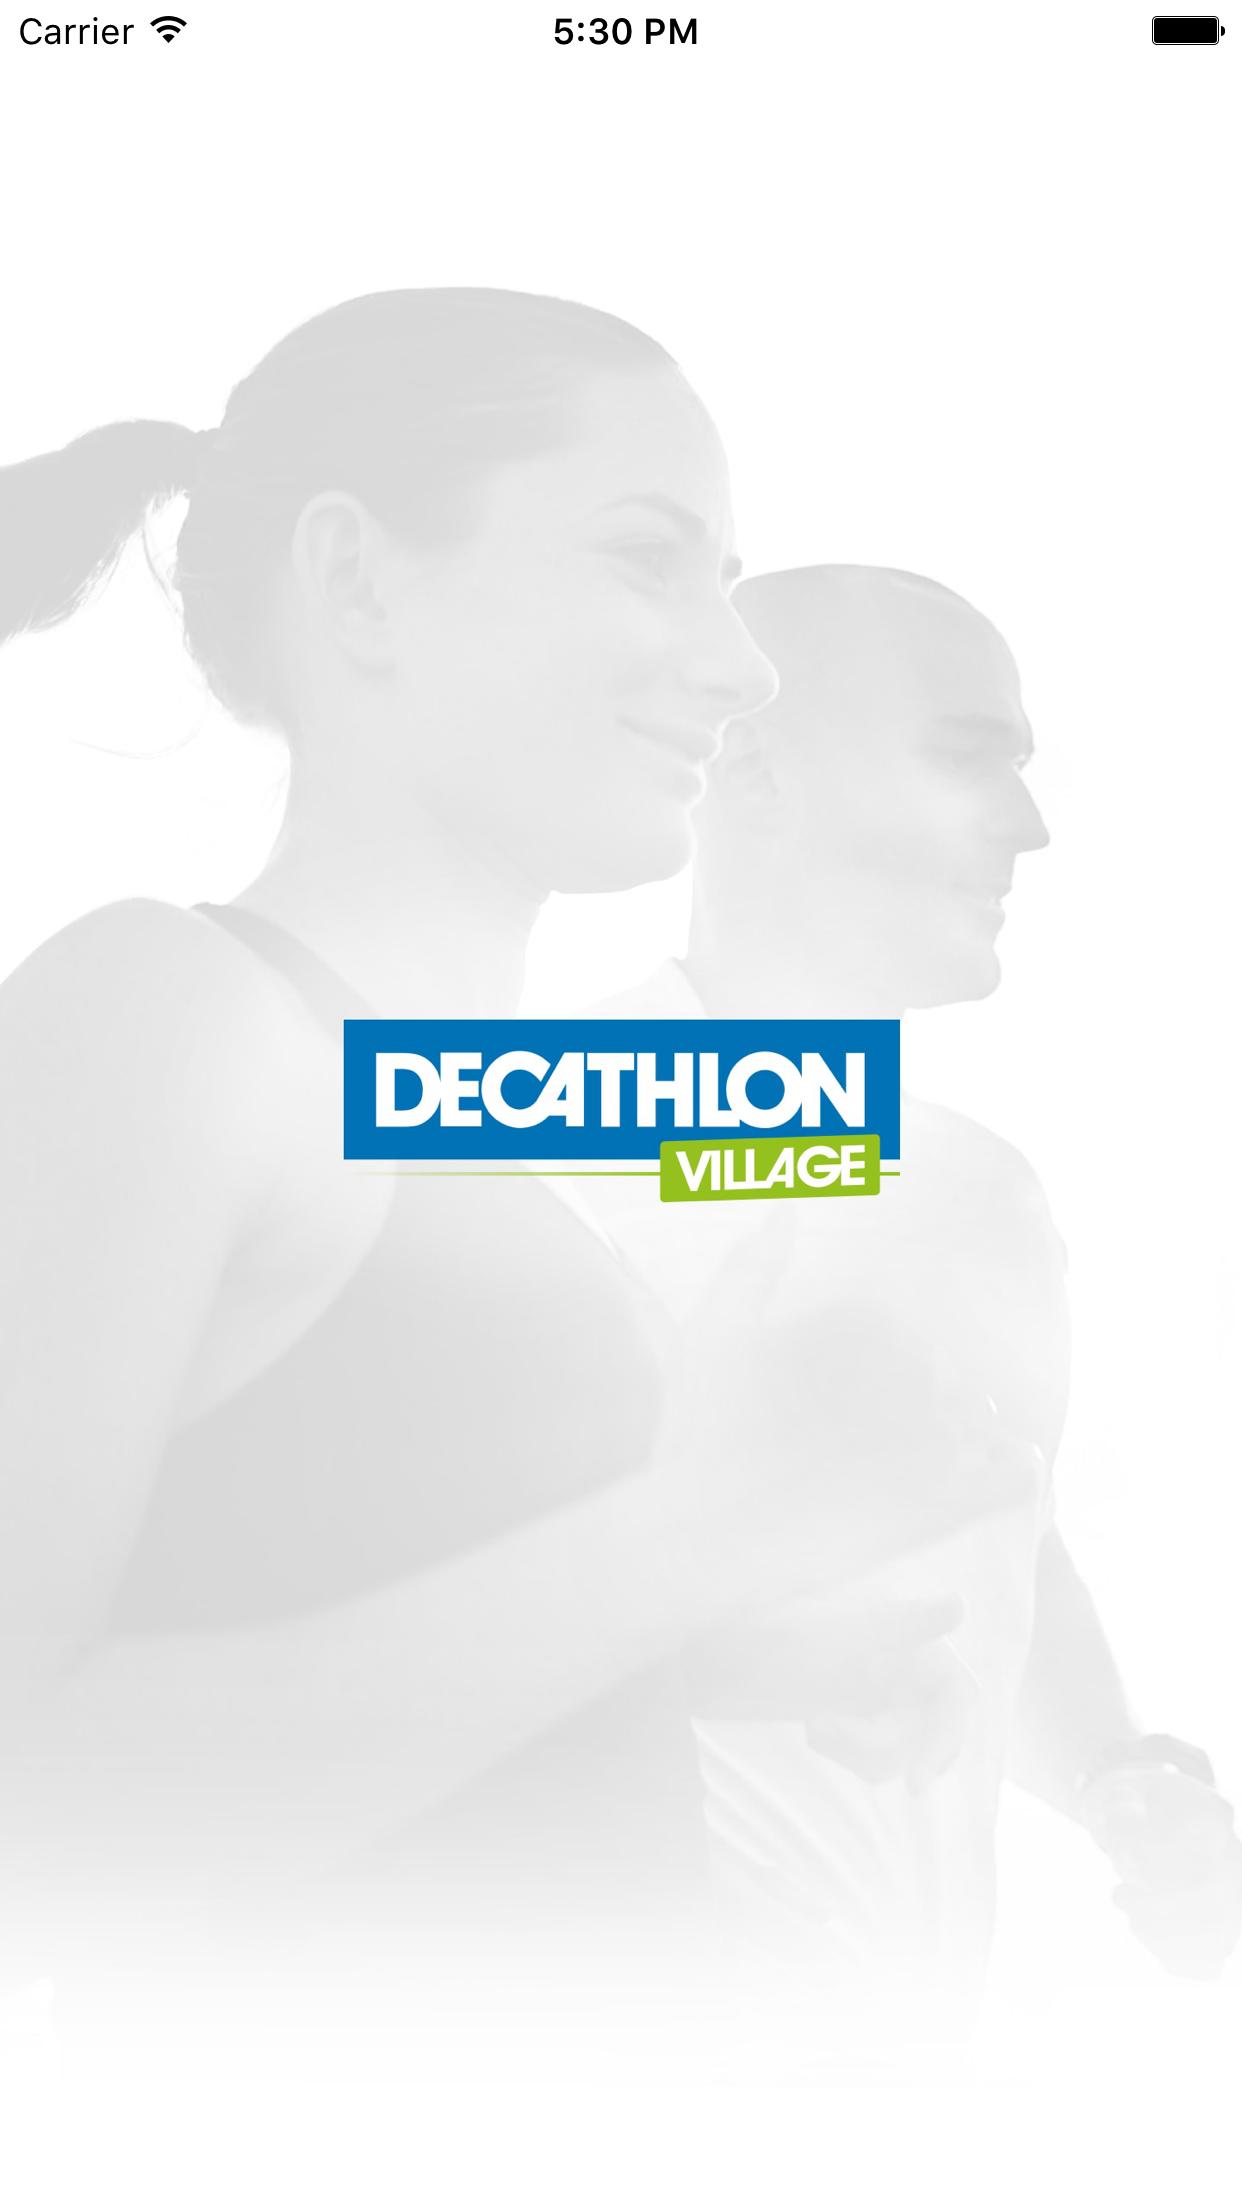 Decathlon Village for Android - APK Download